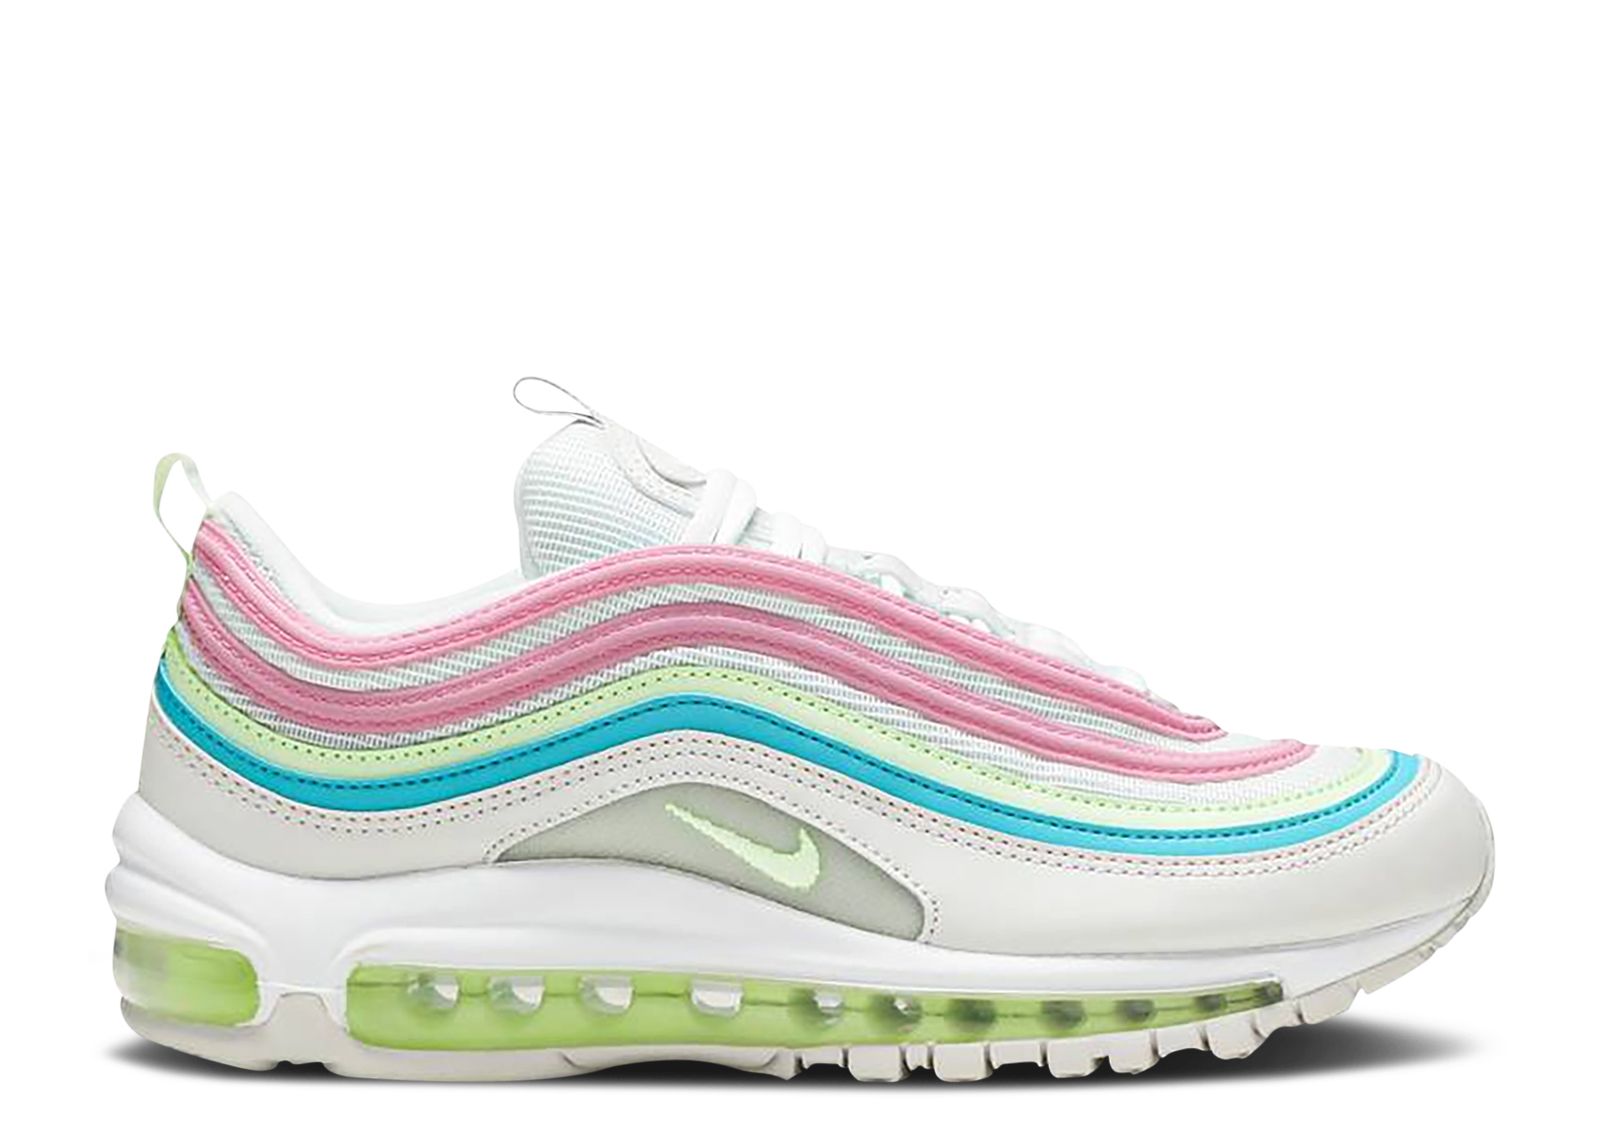 Wmns Air Max 97 'Easter' - Nike - CW7017 100 - white/barely tint Flight Club